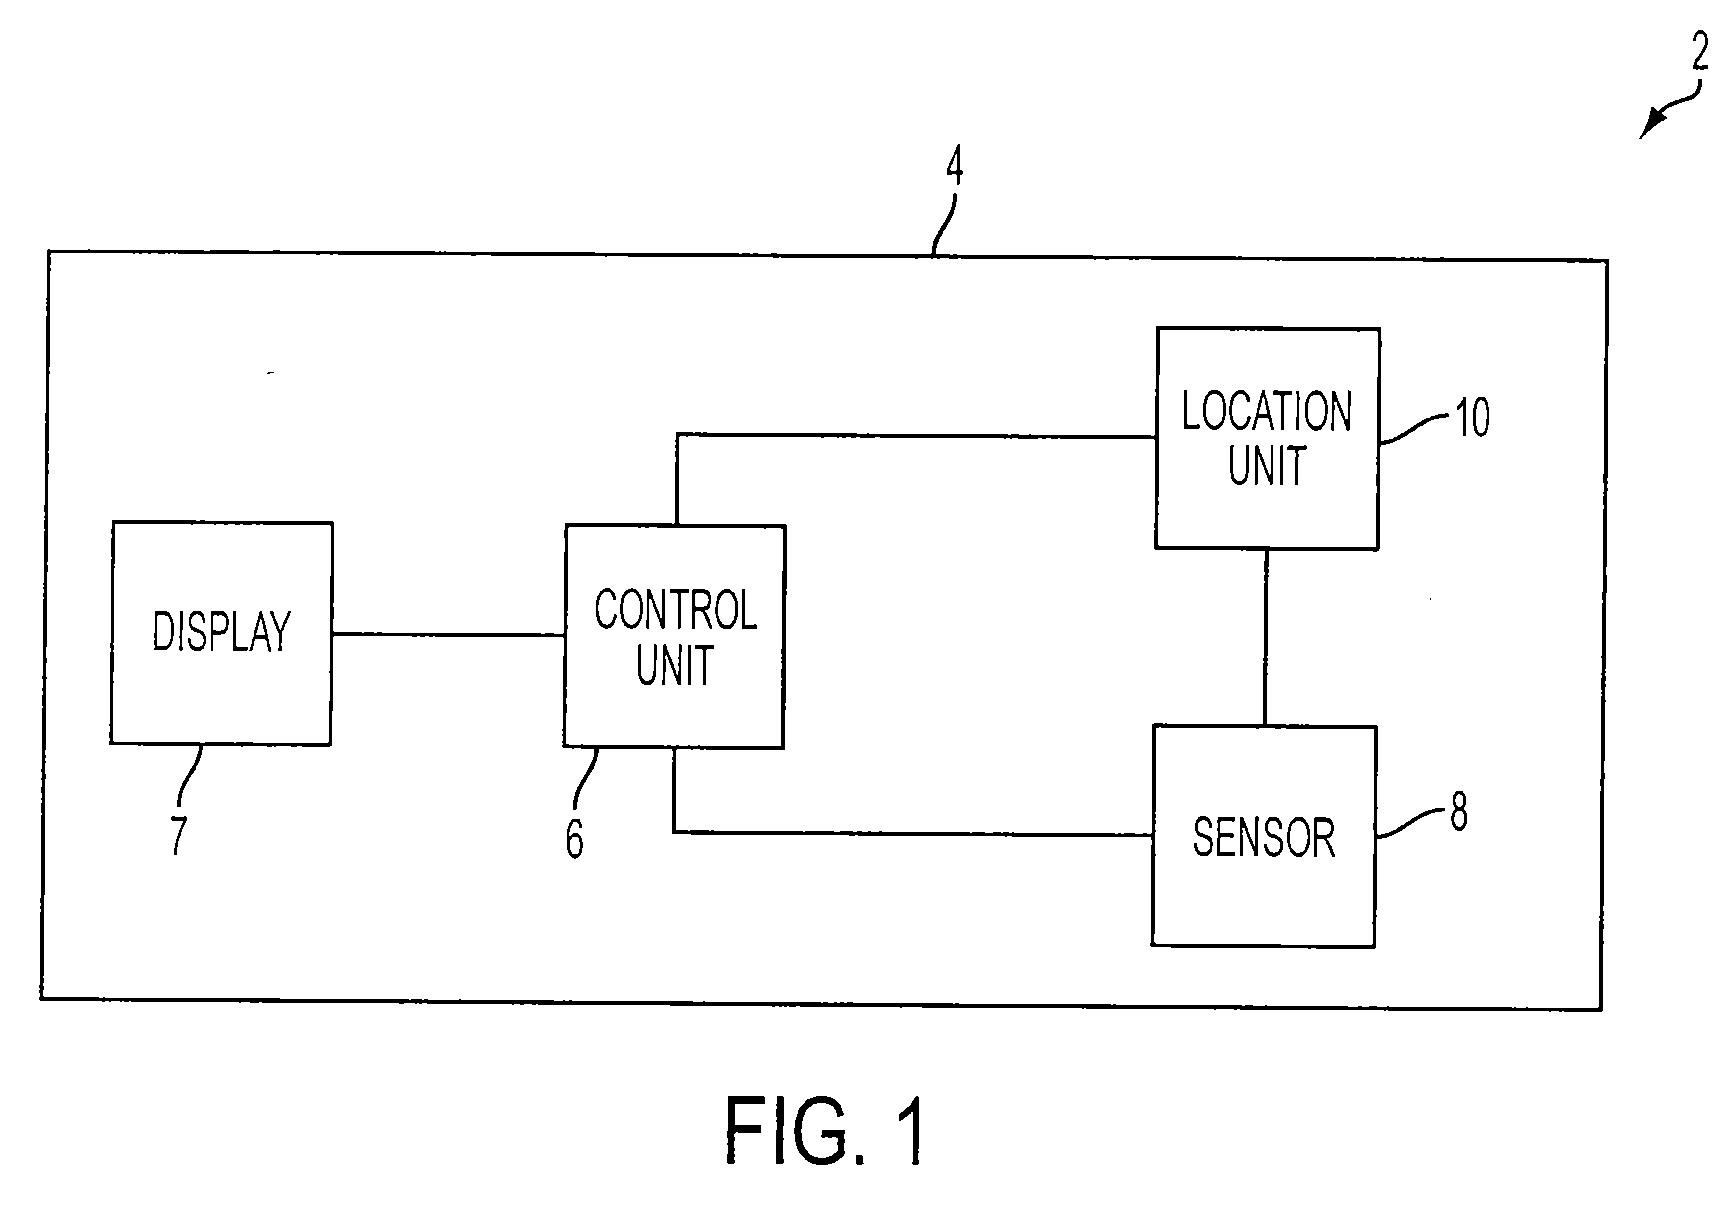 Method and system for mapping environments containing dynamic obstacles